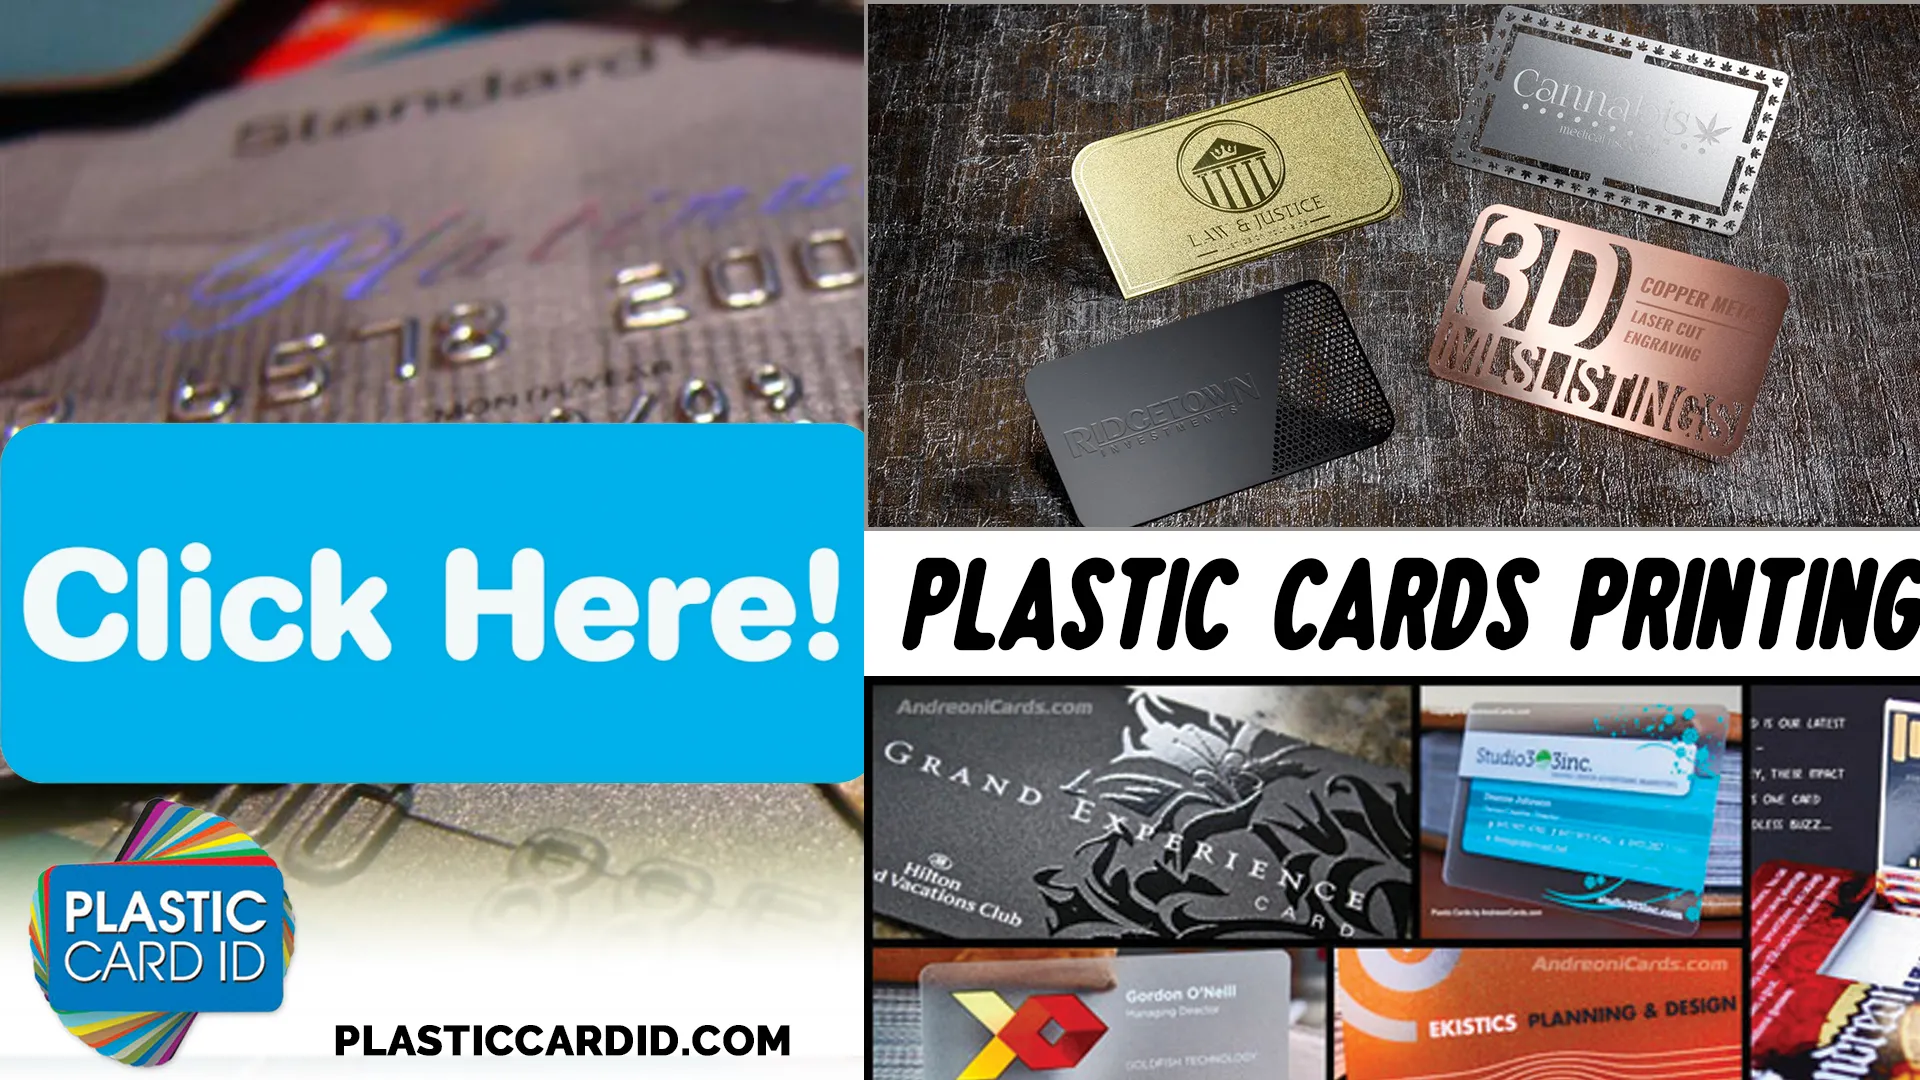 Why Choose Plastic Card ID
 for Your Card Protection?